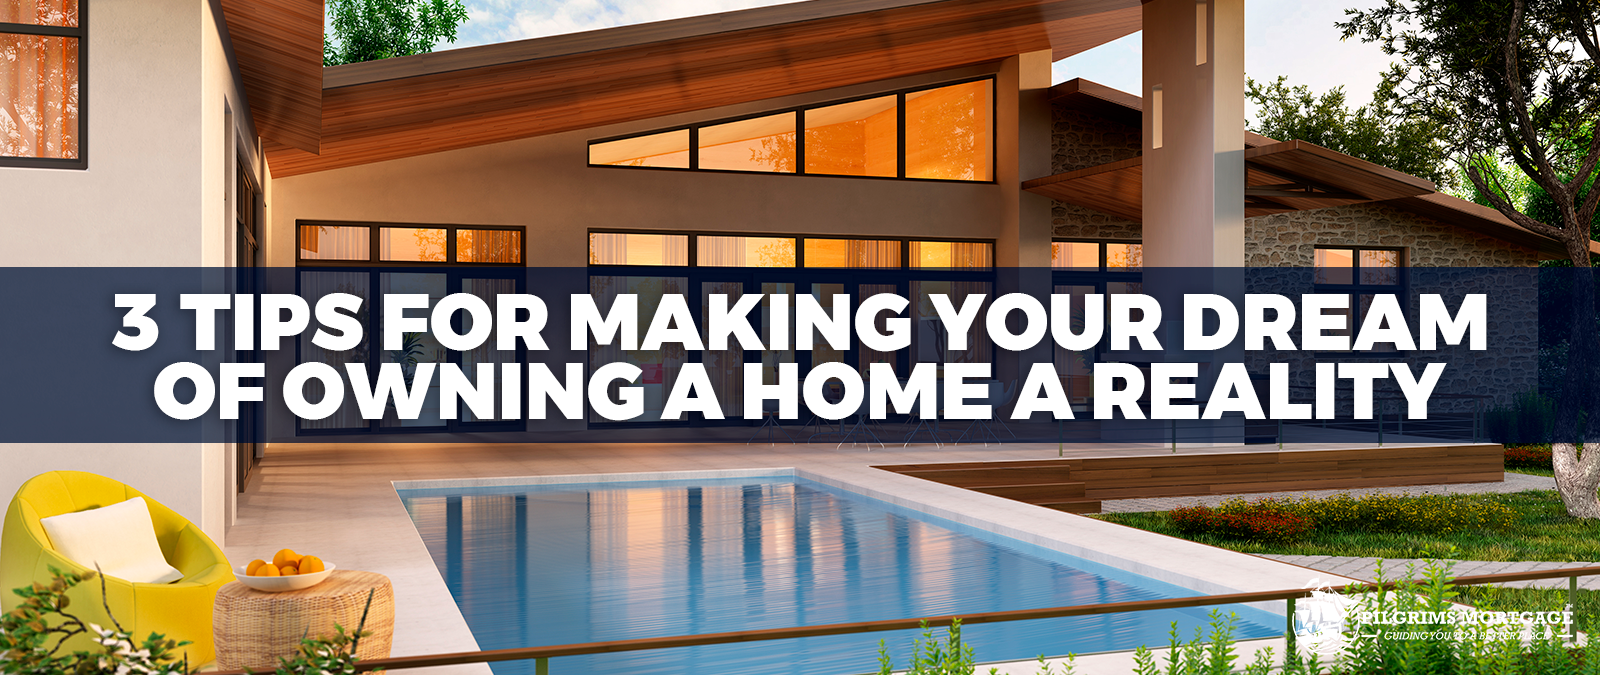 3 Tips For Making Your Dream Of Owning A Home A Reality